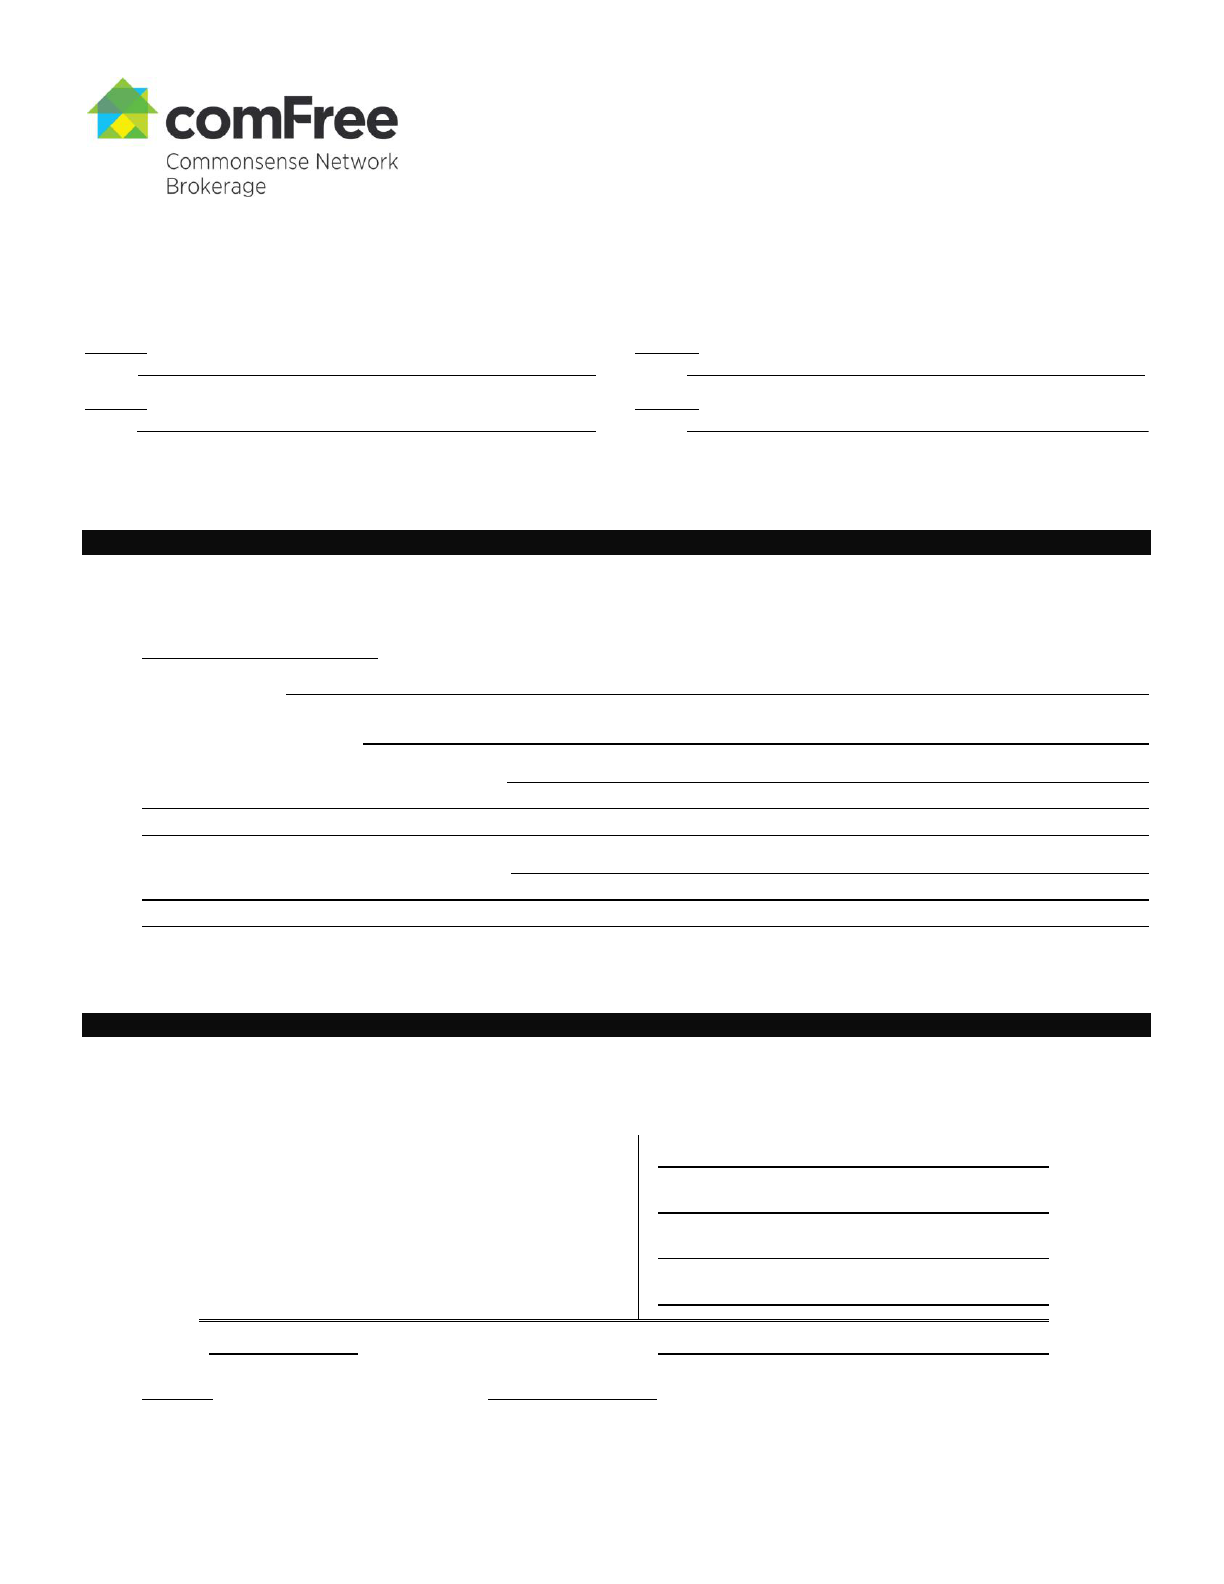 Ontario Real Estate Purchase Contract Form